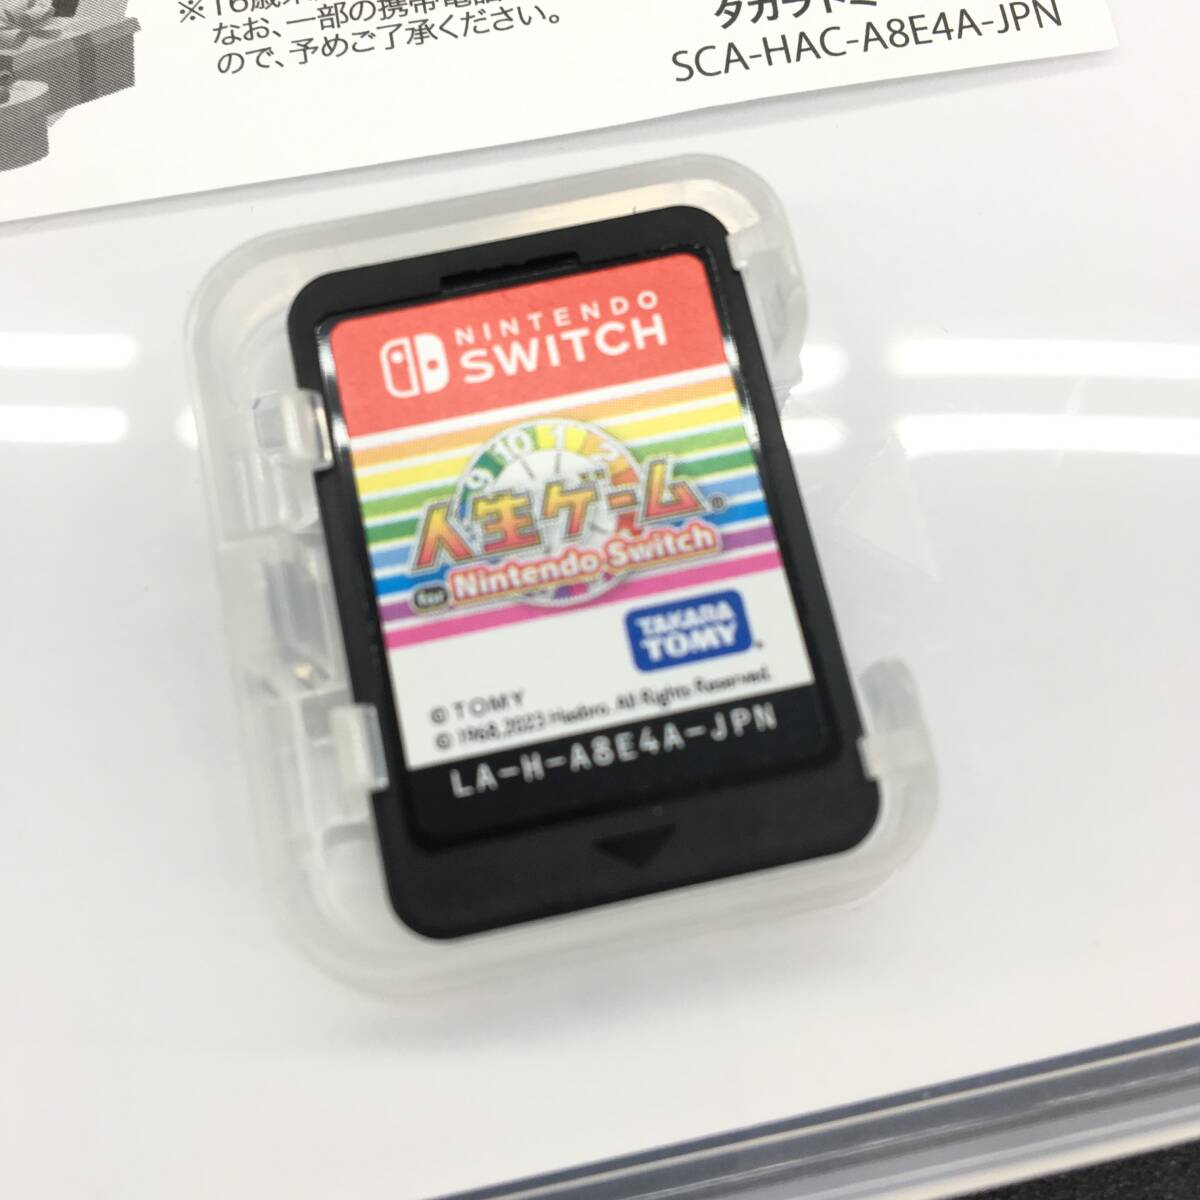 ■Switchソフト【人生ゲーム for Nintendo Switch】送料無料/１円～/読込確認済み（S2007）_画像3